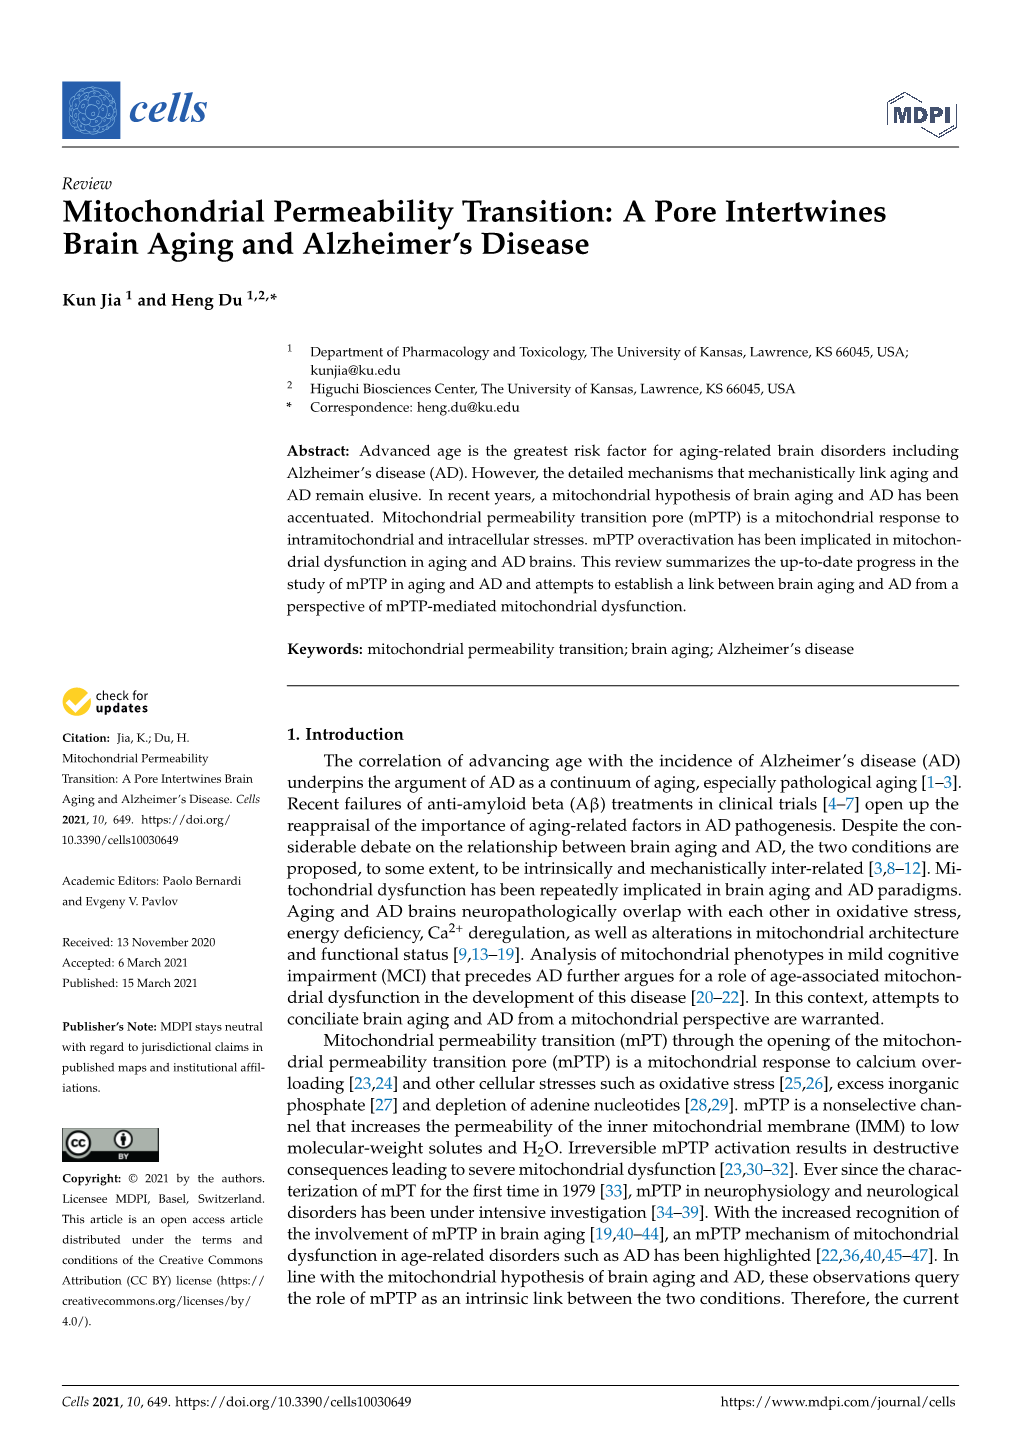 Mitochondrial Permeability Transition: a Pore Intertwines Brain Aging and Alzheimer’S Disease